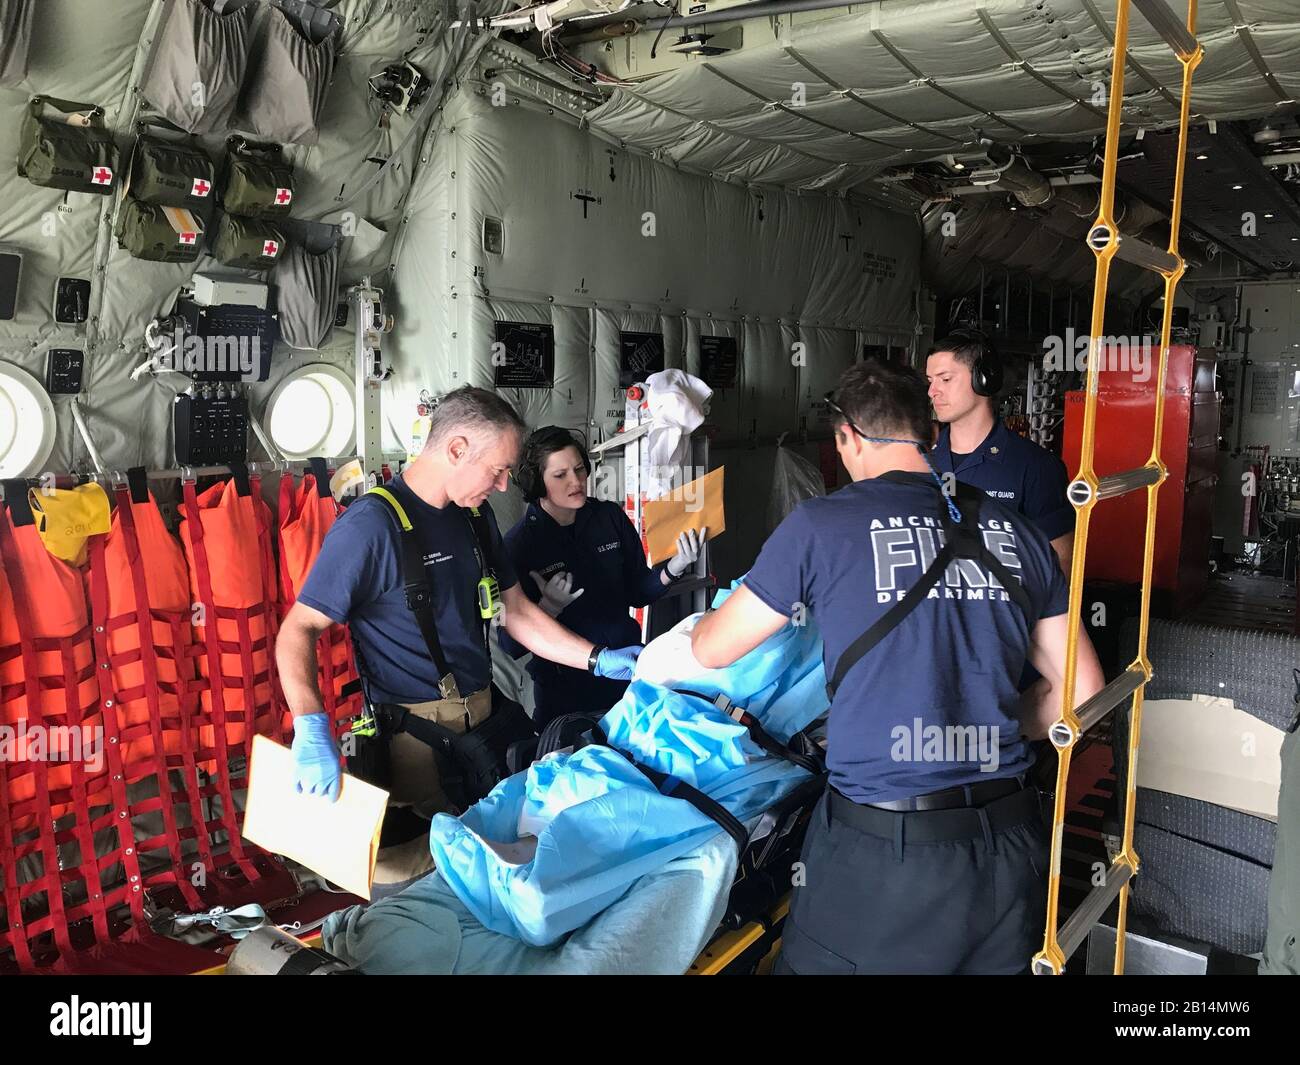 U.S. Navy Petty Officer 3rd Class Rena Gilbertson, a health services technician aboard an Air Station Kodiak HC-130J Hercules aircraft, works with Anchorage emergency medical services personnel to transfer a woman to higher medical care in Anchorage, Alaska, August 3, 2019. Air Station Kodiak aircrews medevaced the woman and her husband from St. Paul Island, Alaska, to Anchorage for further care. (U.S. Coast Guard courtesy photo) Stock Photo